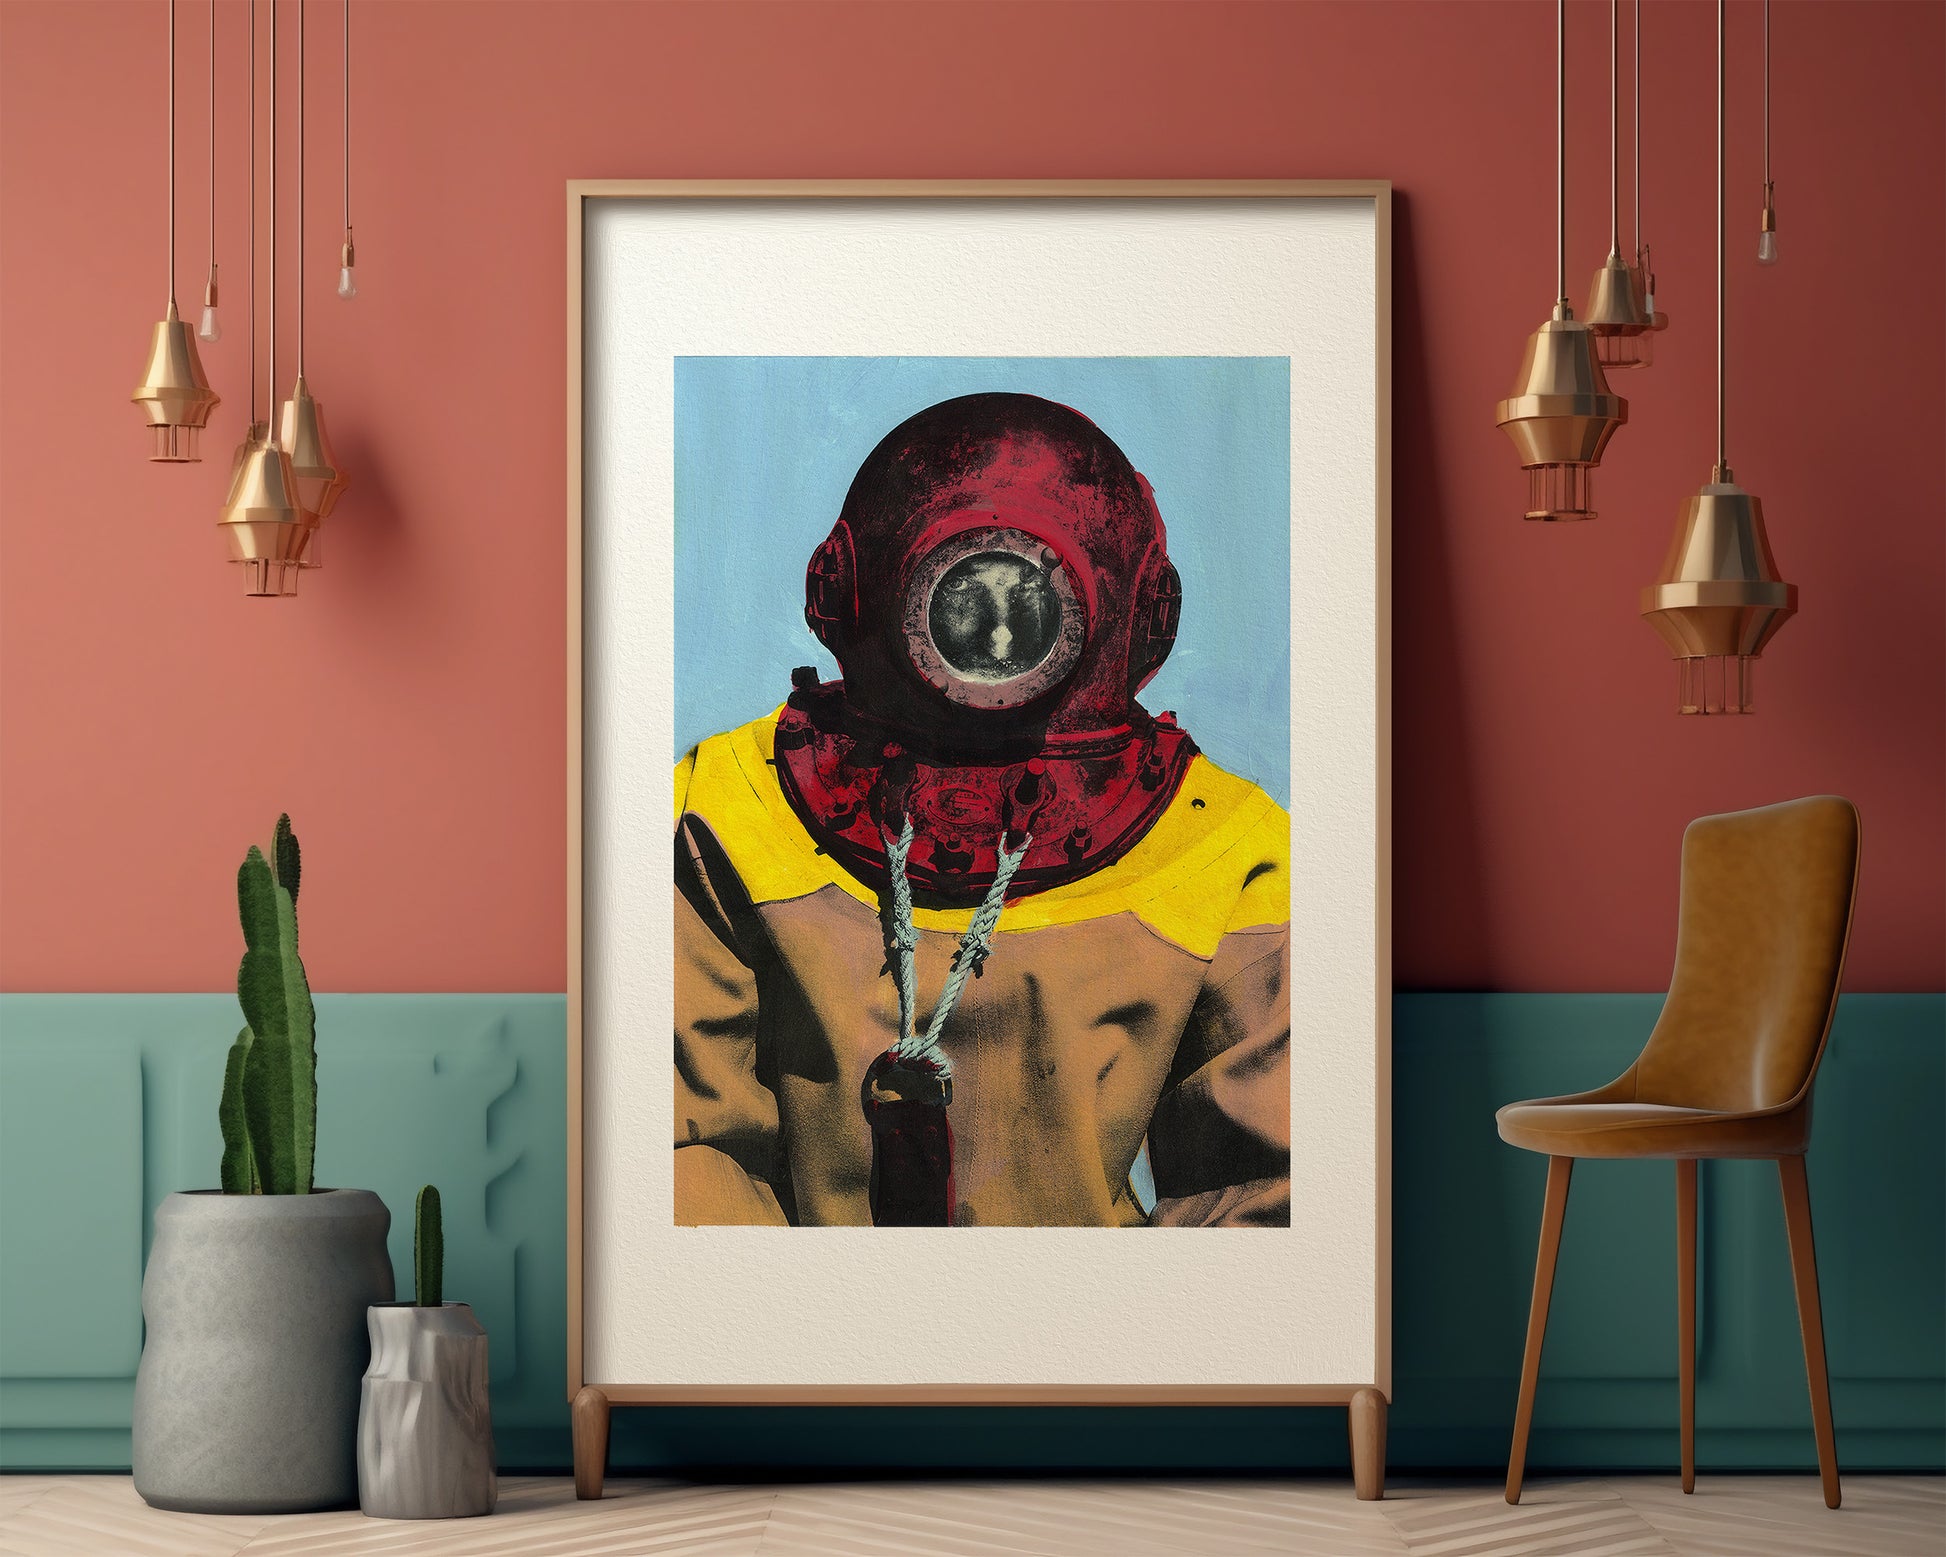 Painting Pop Art Wall Art from Greece | Baby blue & red sponge diver from Kalymnos island, by George Tatakis - inside an eclectic room